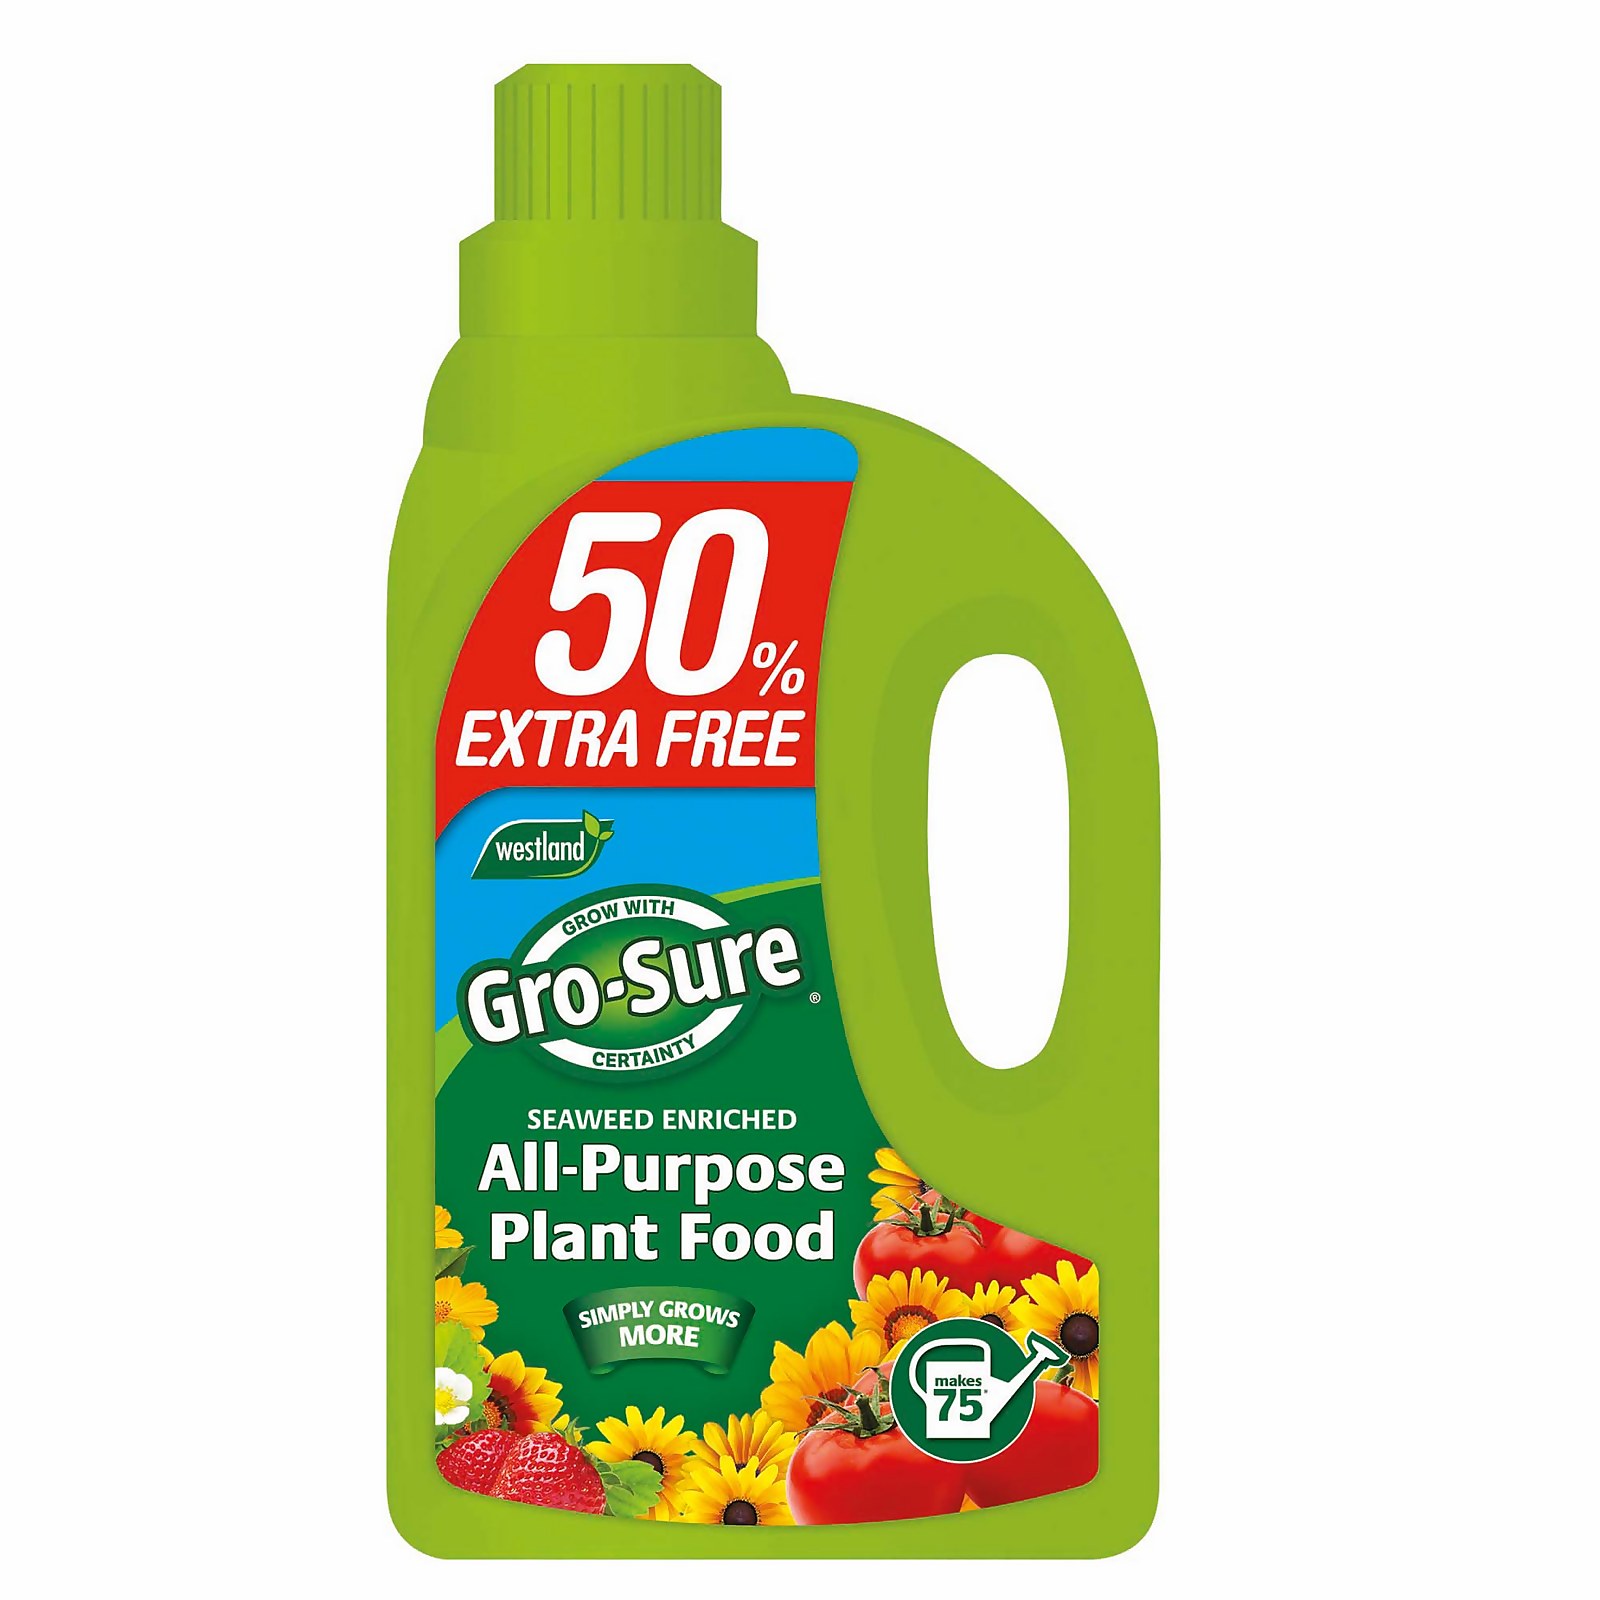 Photo of Gro-sure Super Enriched All Purpose Concentrated Plant Food- 1.5 L